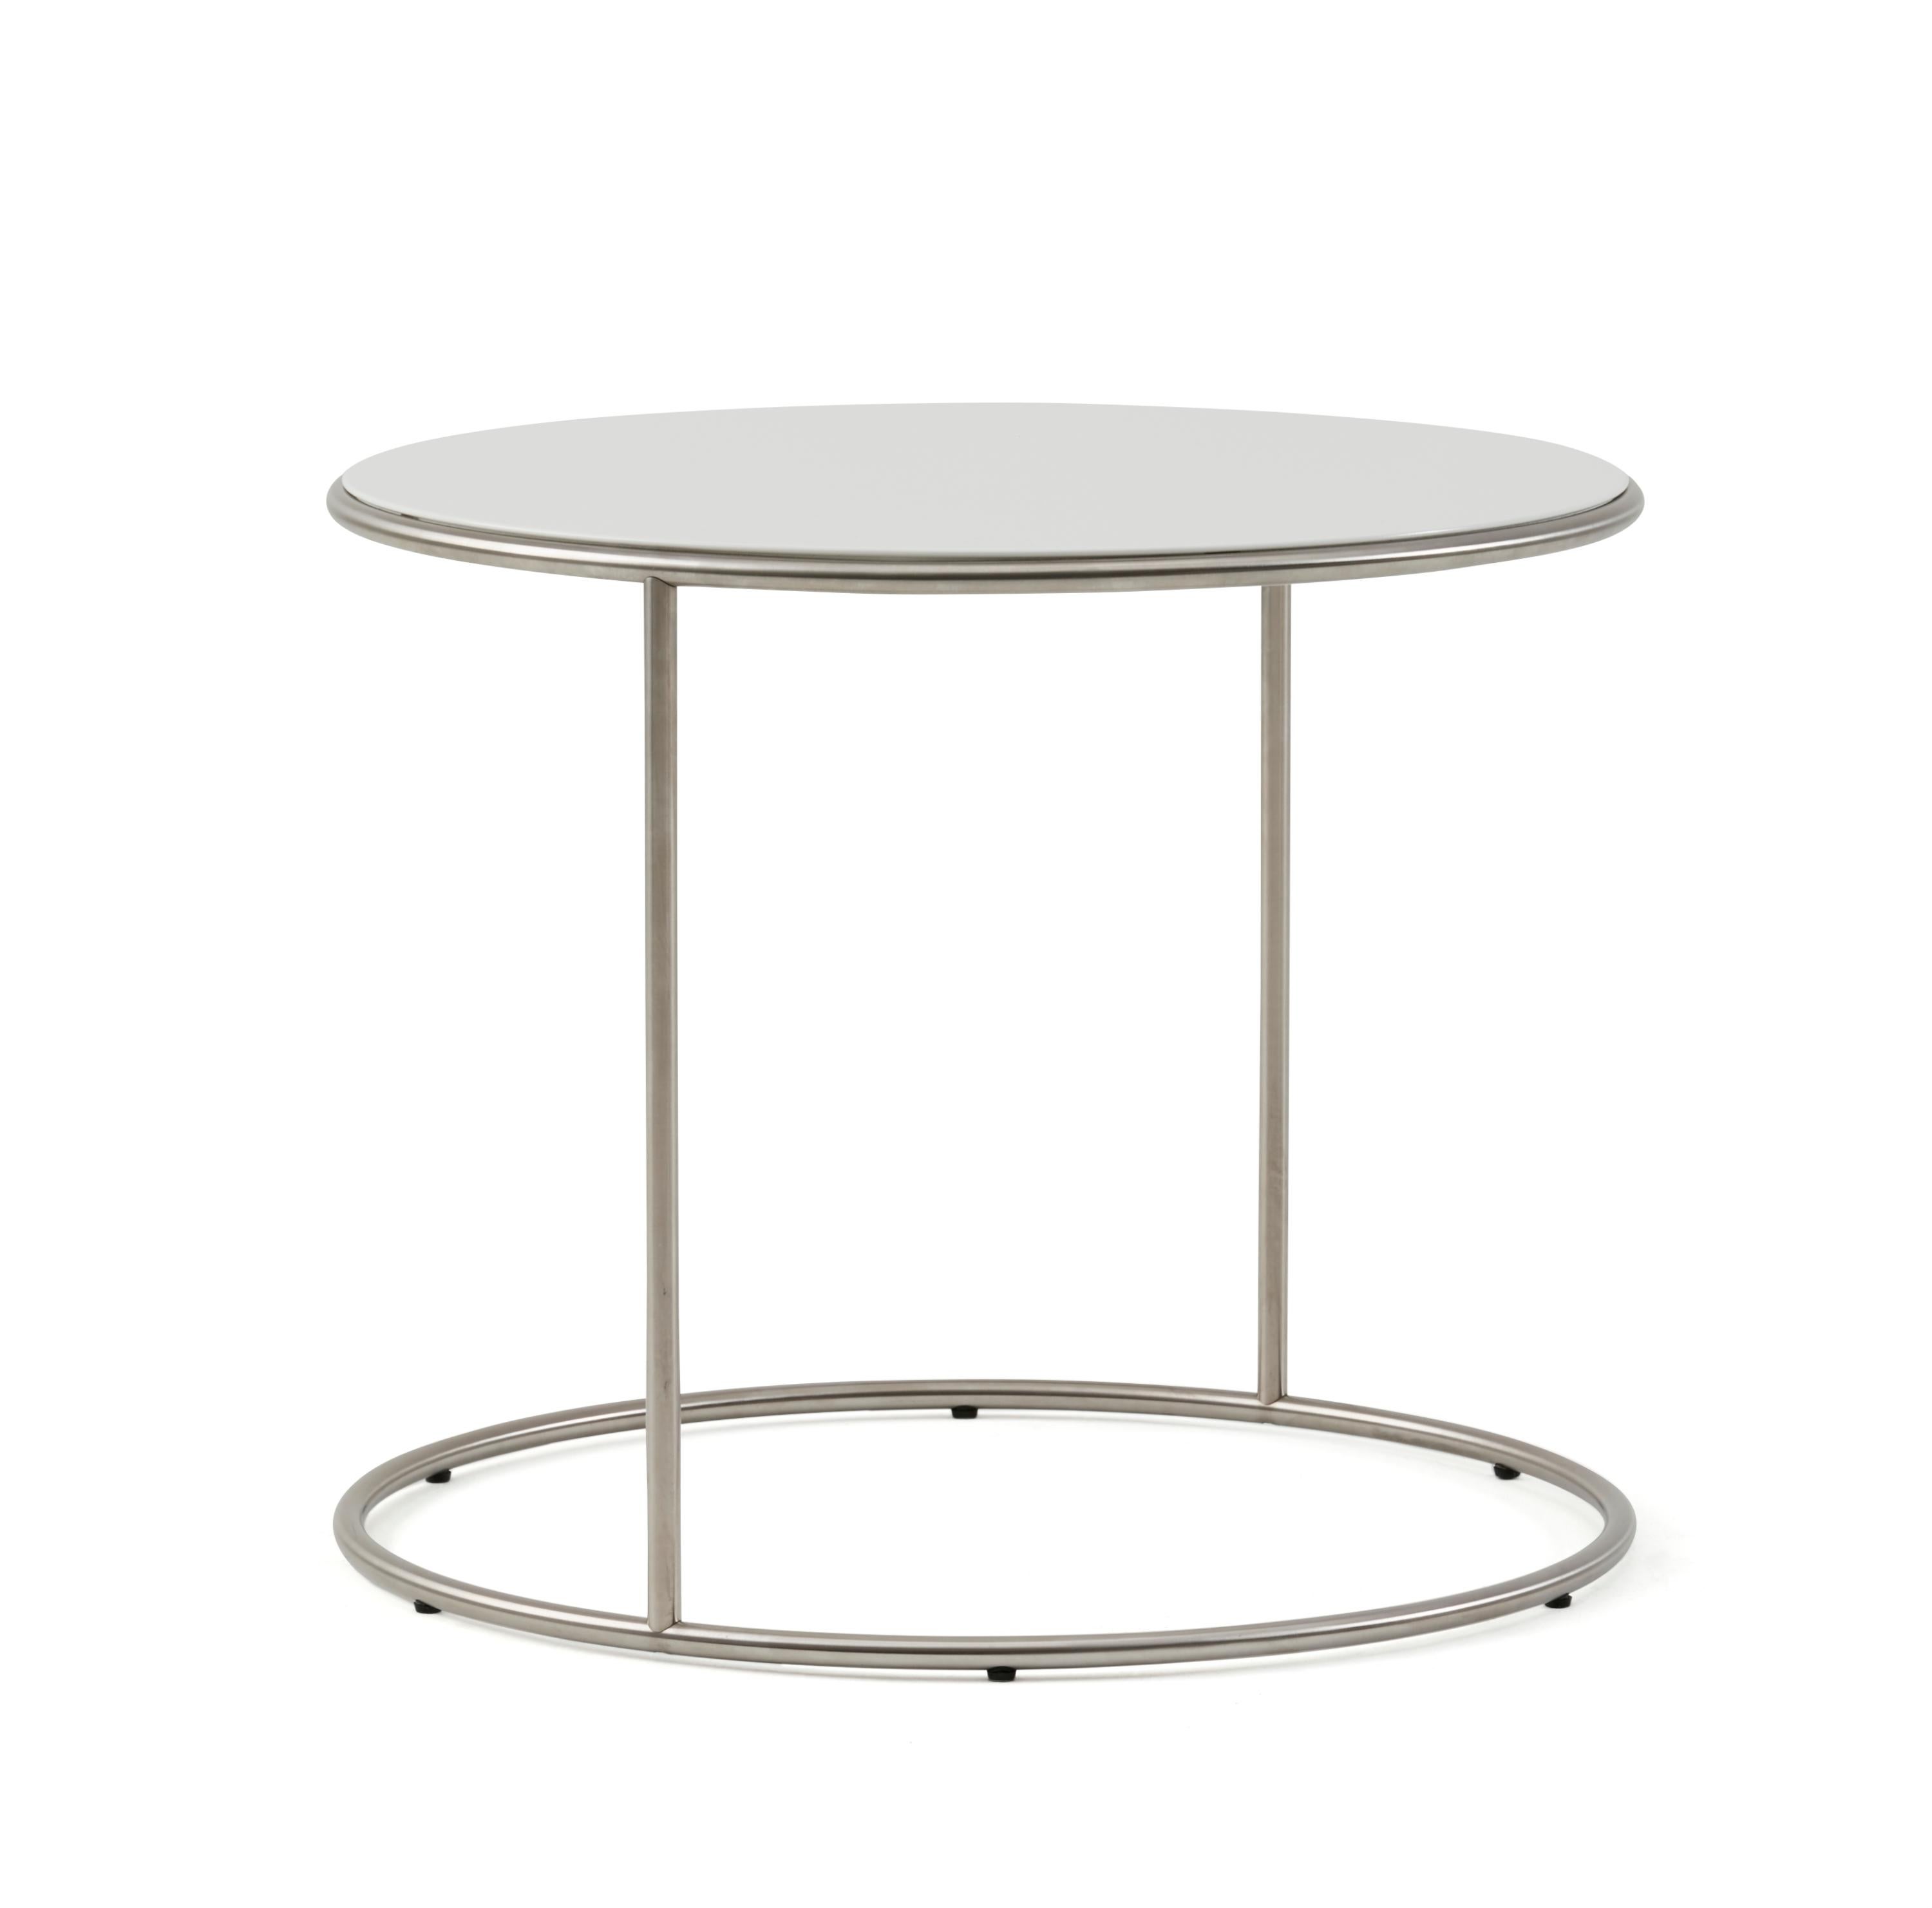 For Sale: White (01_White) Catalano and Marelli Cannot Table Lacquered Matte or Glossy Finish, Cappellini 2